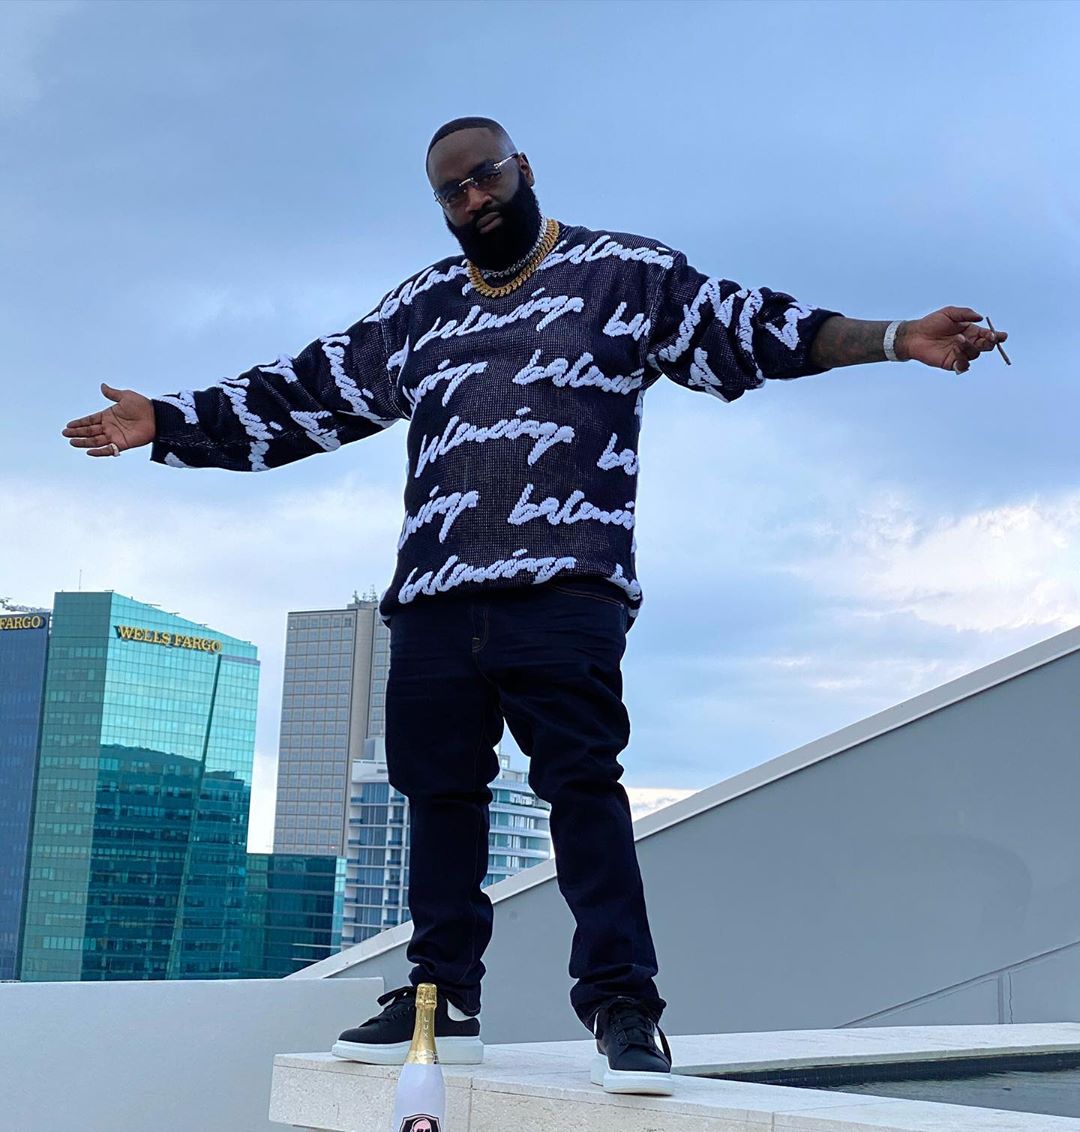 Rick Ross Spreads His Arms In a Balenciaga Sweater & McQueen Sneakers